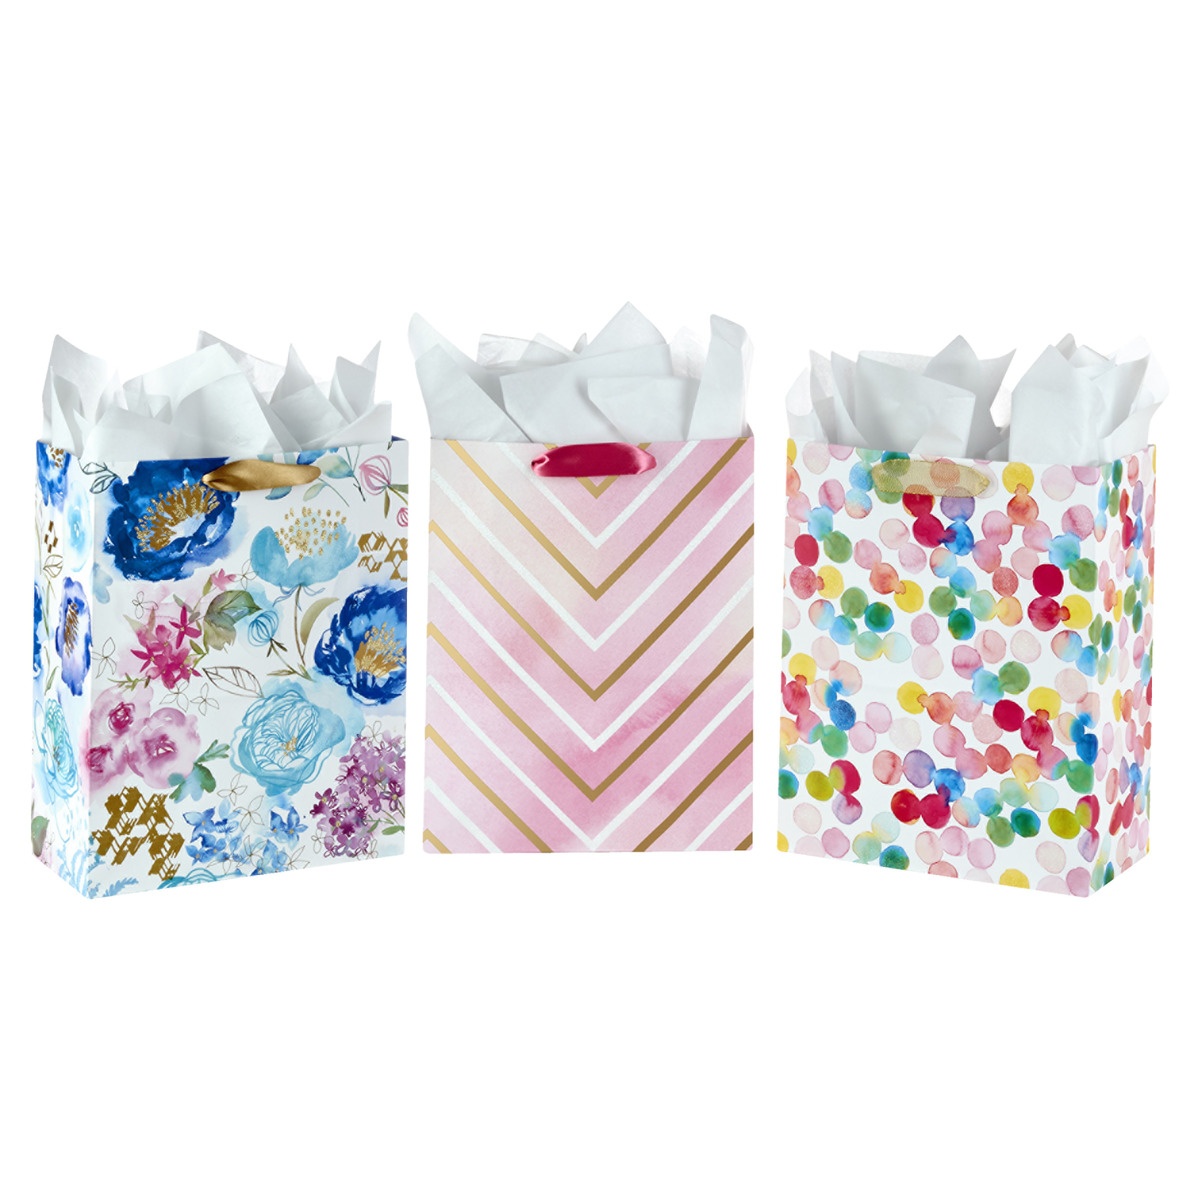 slide 1 of 1, Hallmark Large Gift Bags Assortment With Tissue Paper For Birthdays, Baby Showers, Bridal Showers, Holidays (Colorful Ombr - Pack Of 3), 3 ct